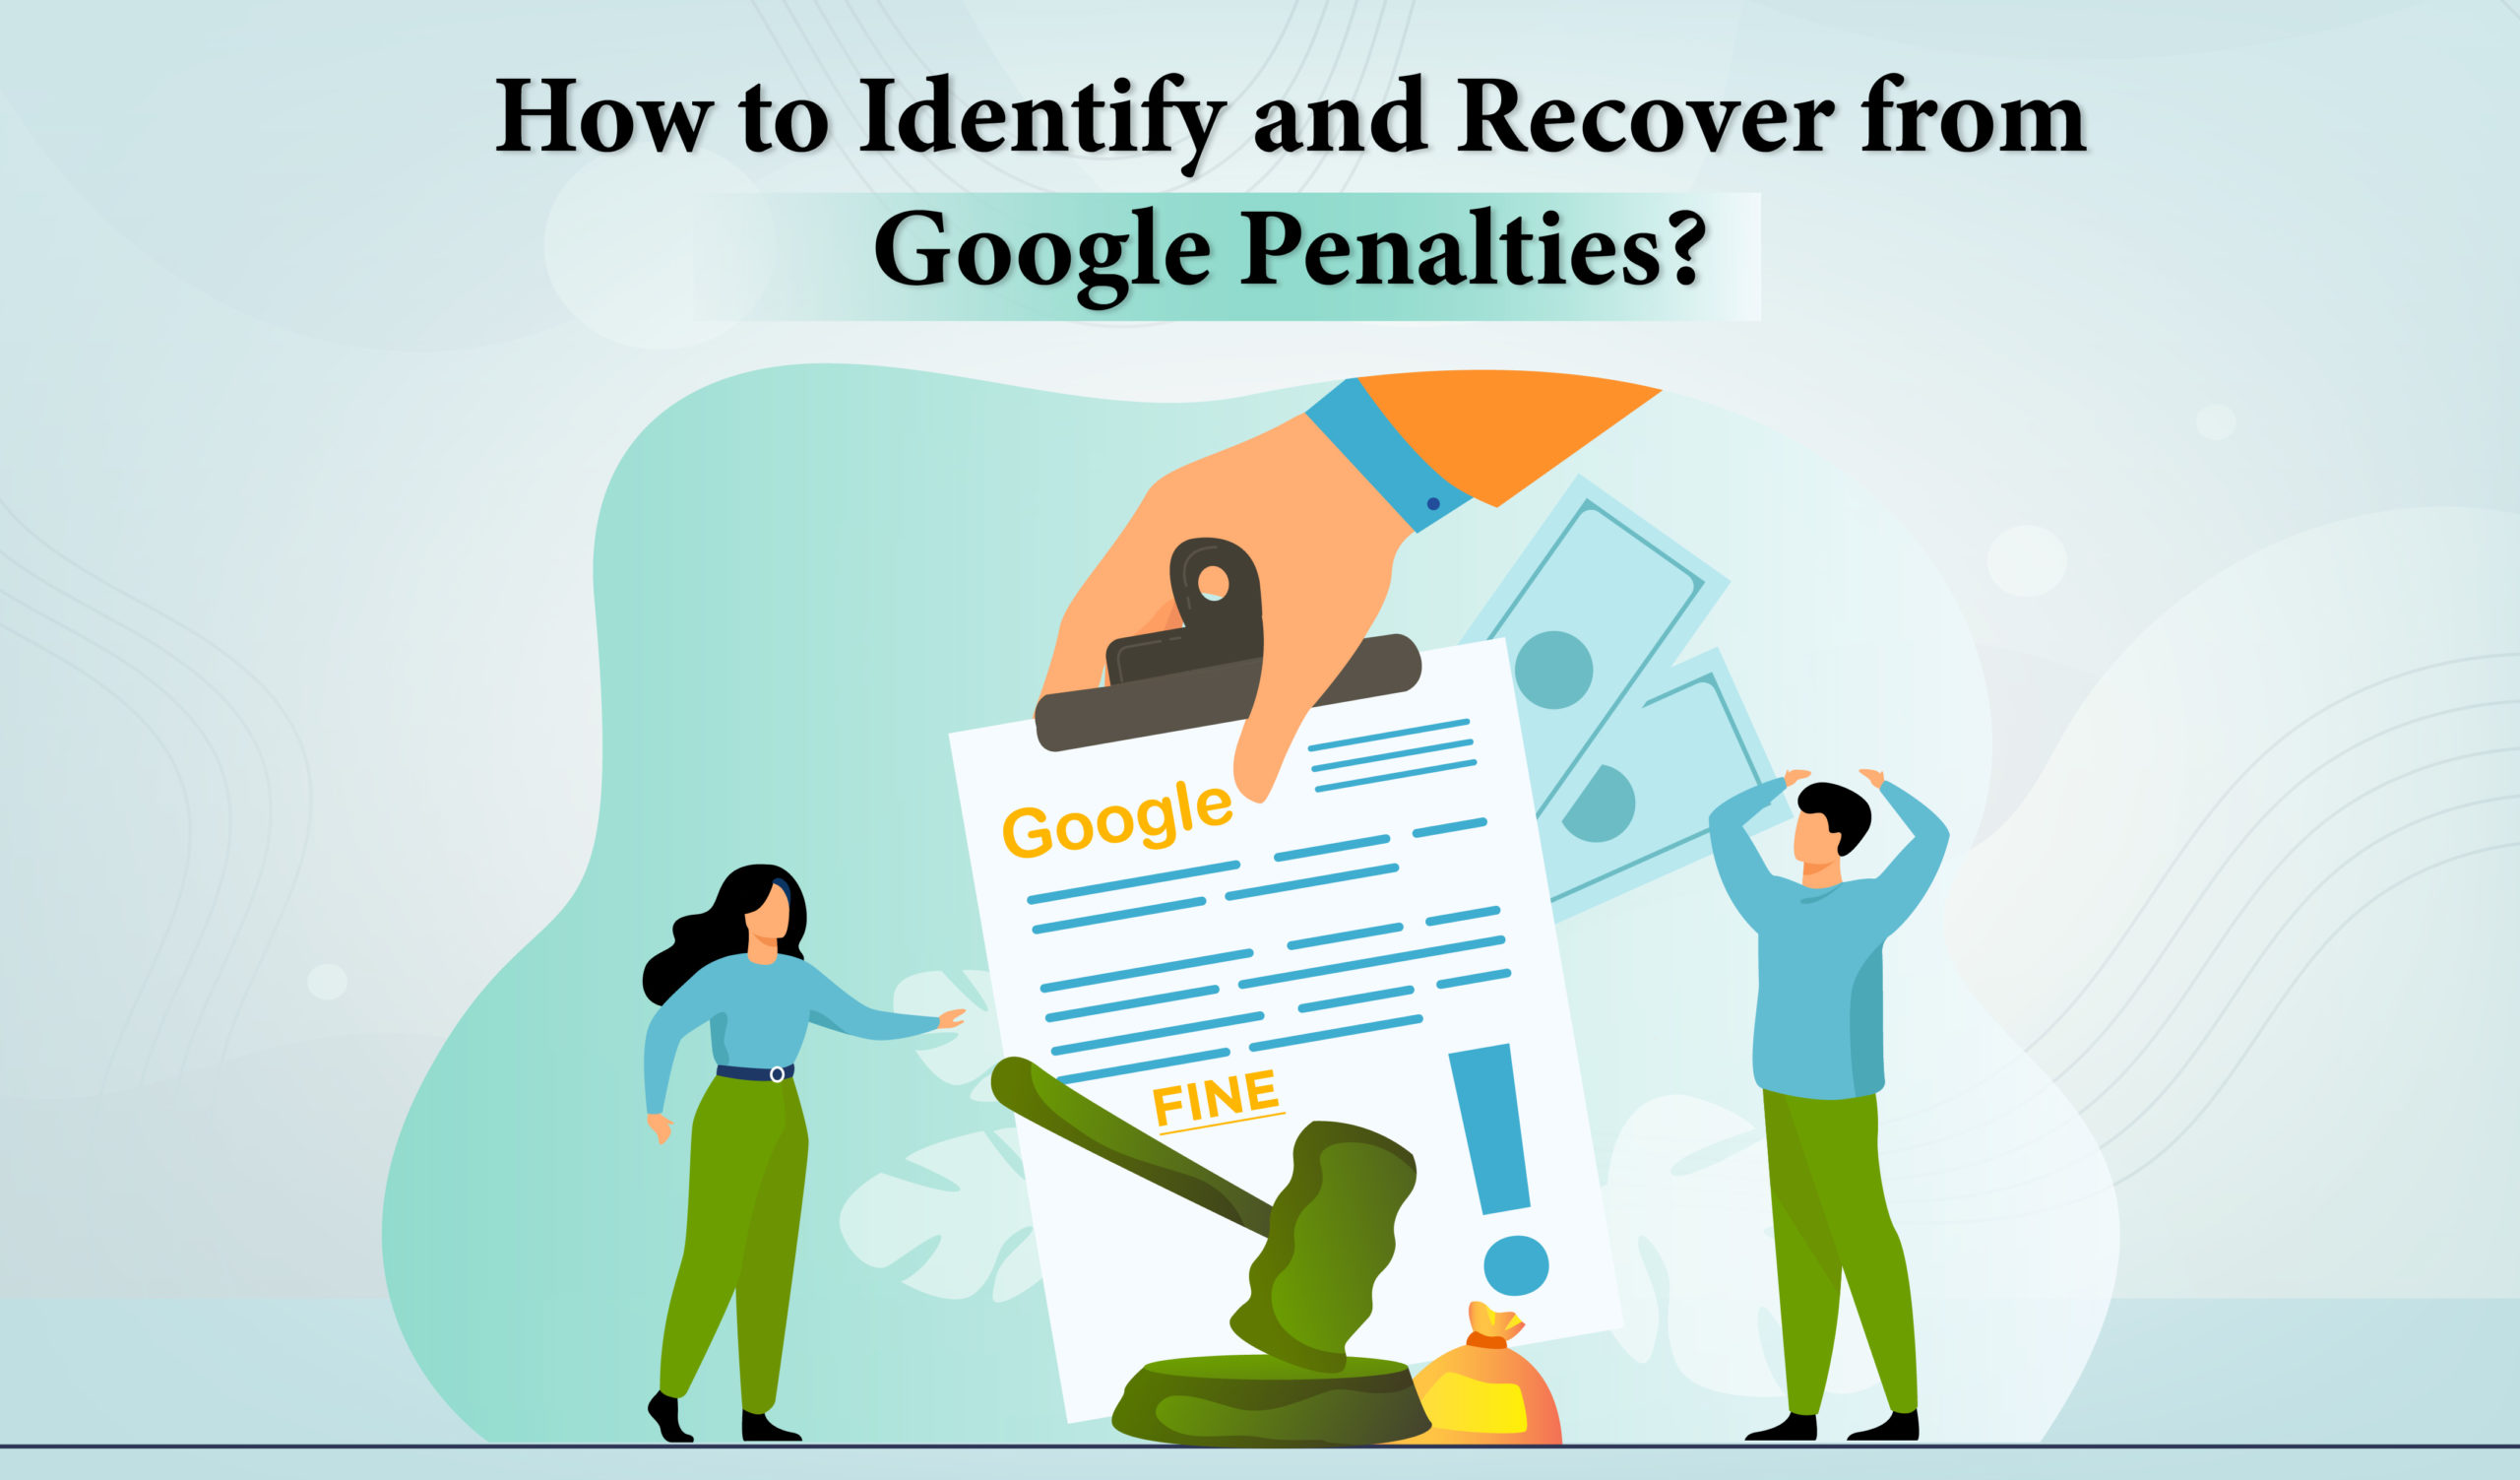 How to Identify and Recover from Google Penalties?